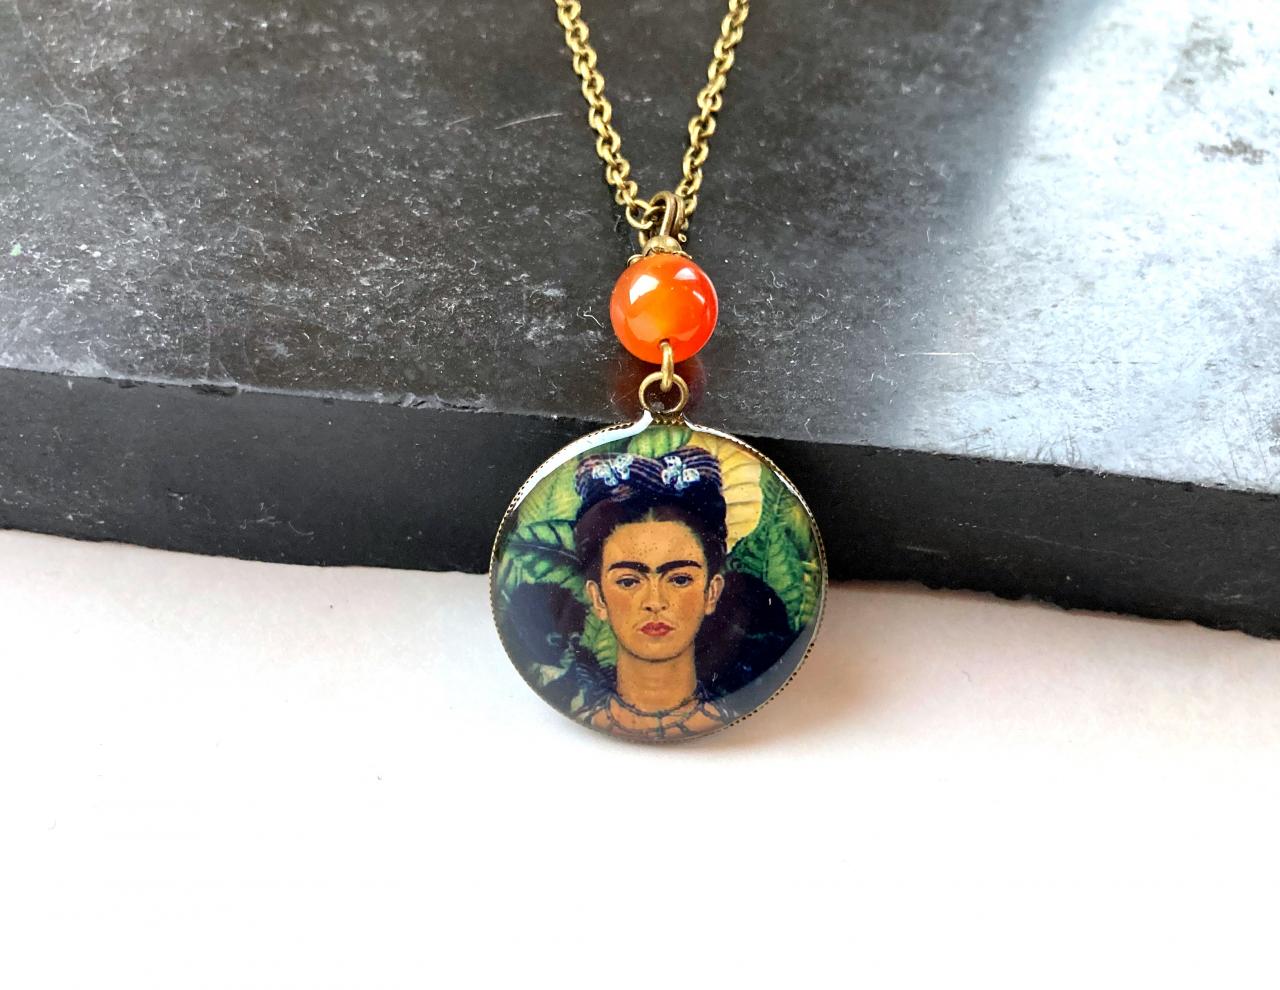 Bohemian Brass Necklace With A Frida Kahlo Pendant And An Orange Carnelian Pearl, Selma Dreams